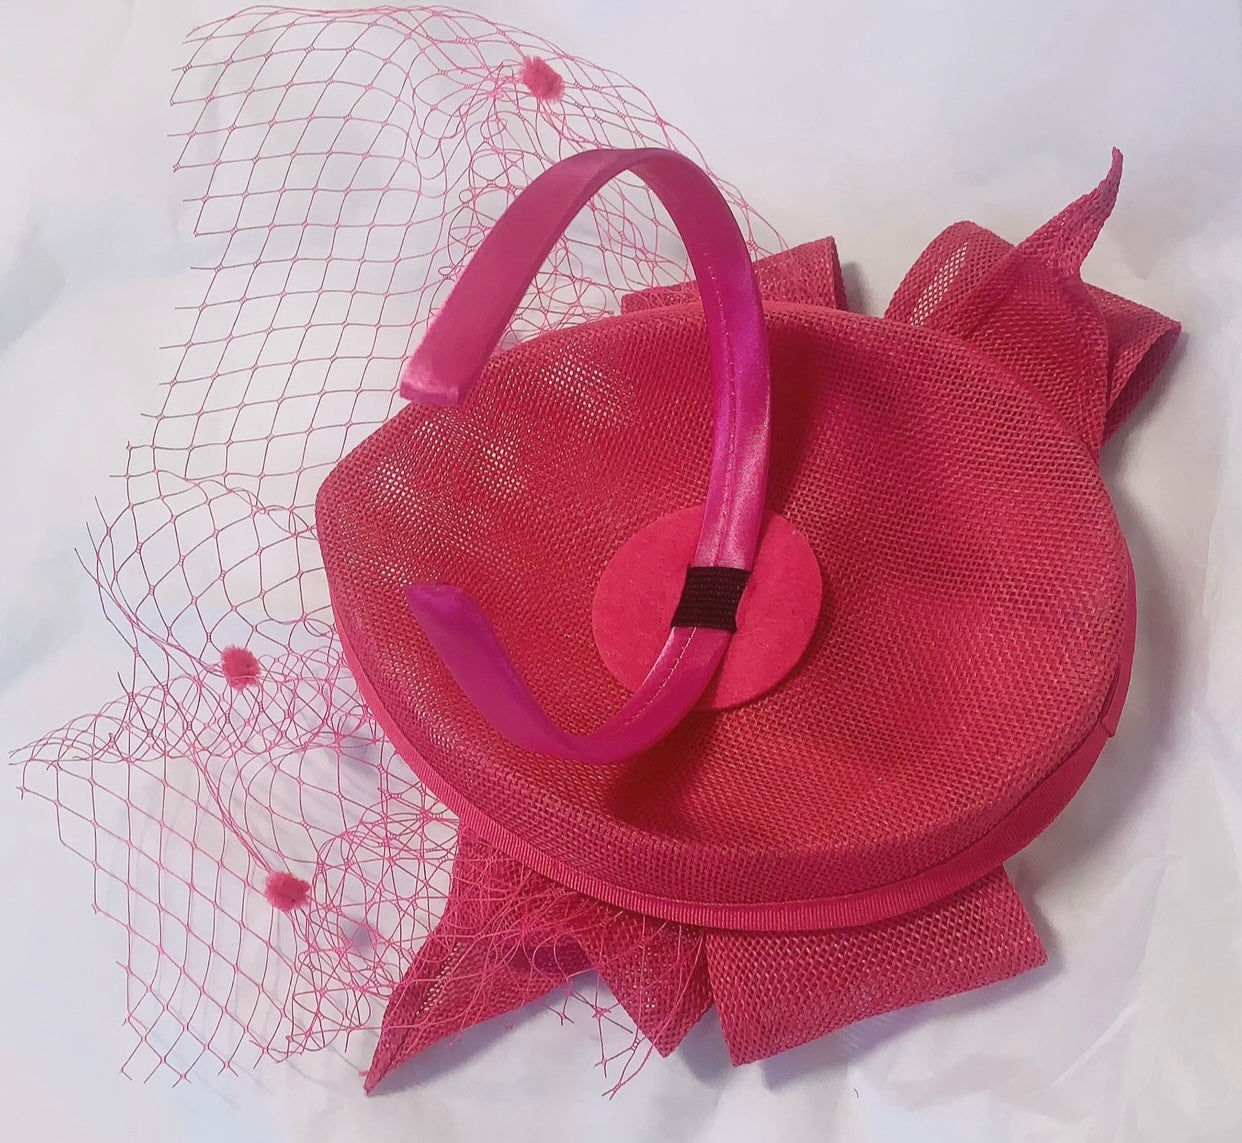 Teardrop Pointed Pillbox Large Bow Fascinator with Birdcage Veil on Headband - Red